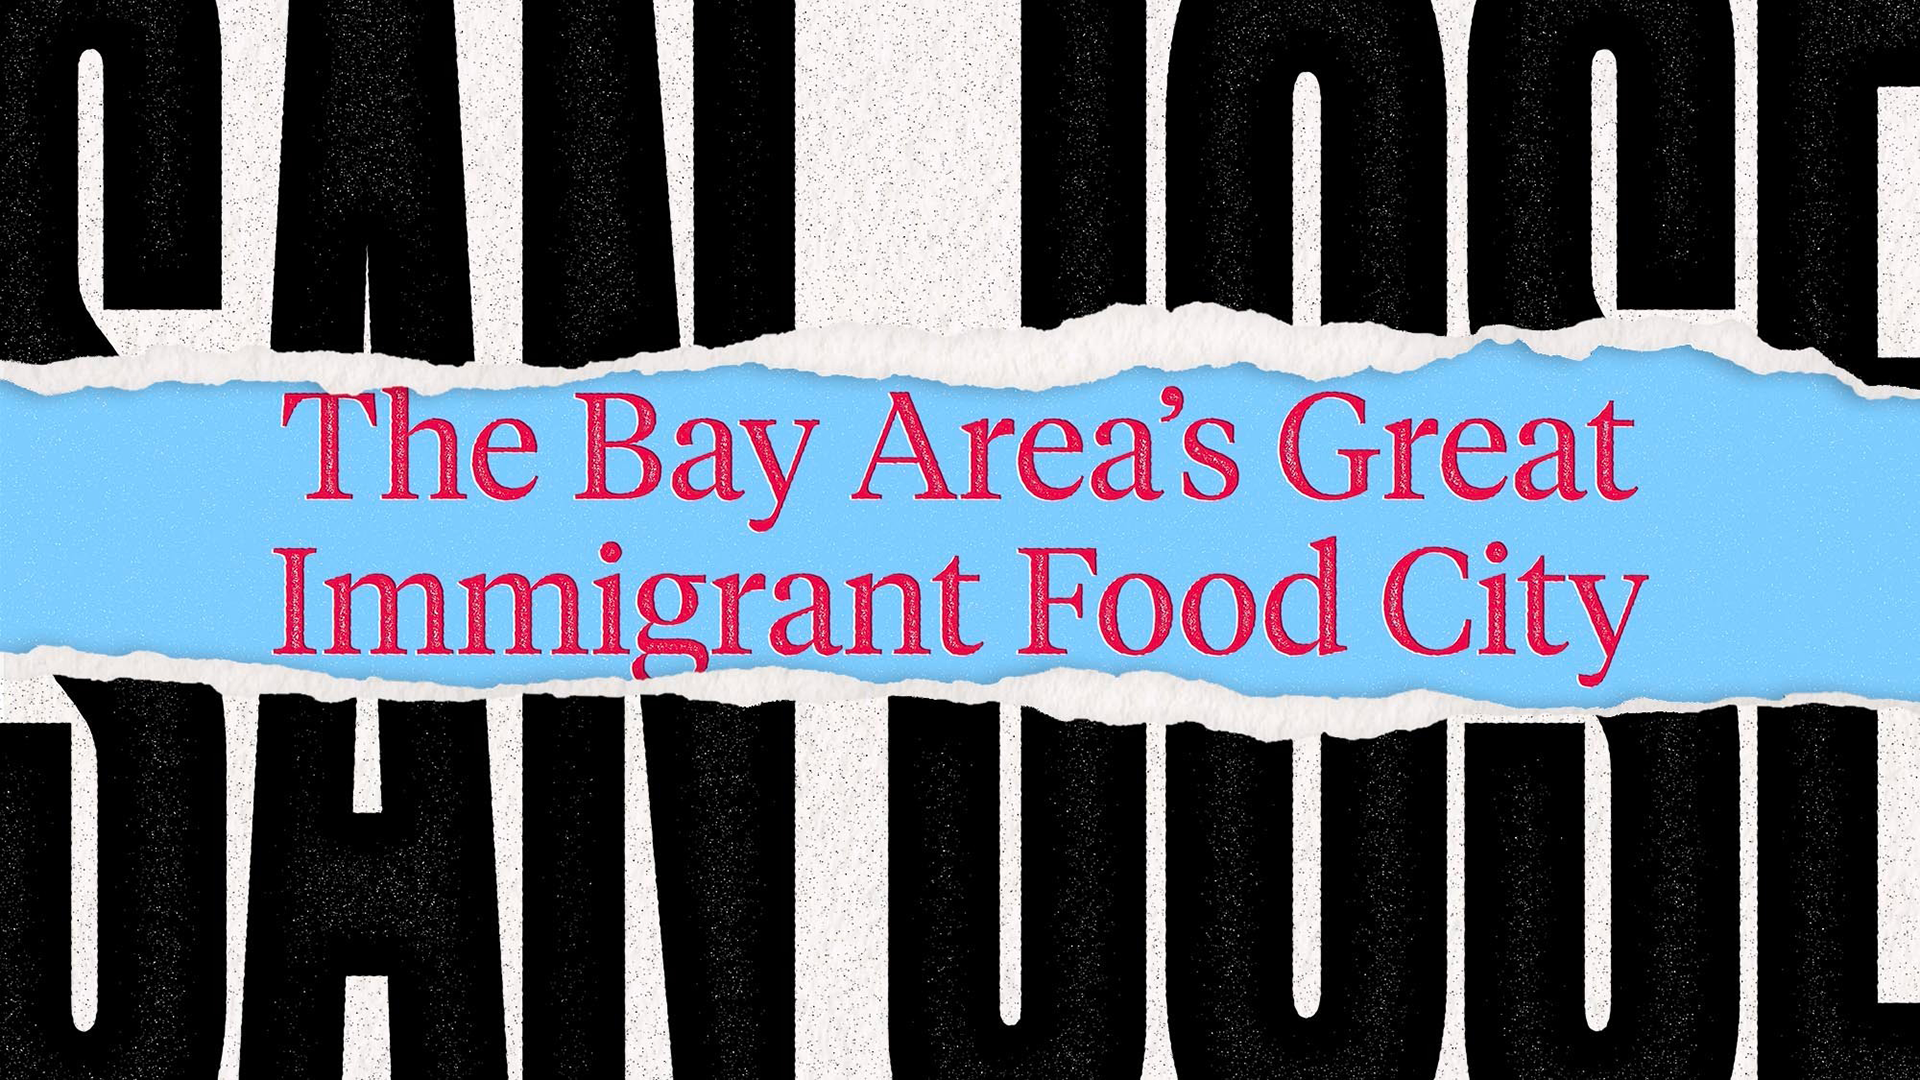 San Jose: The Bay Area's Great Immigrant Food City